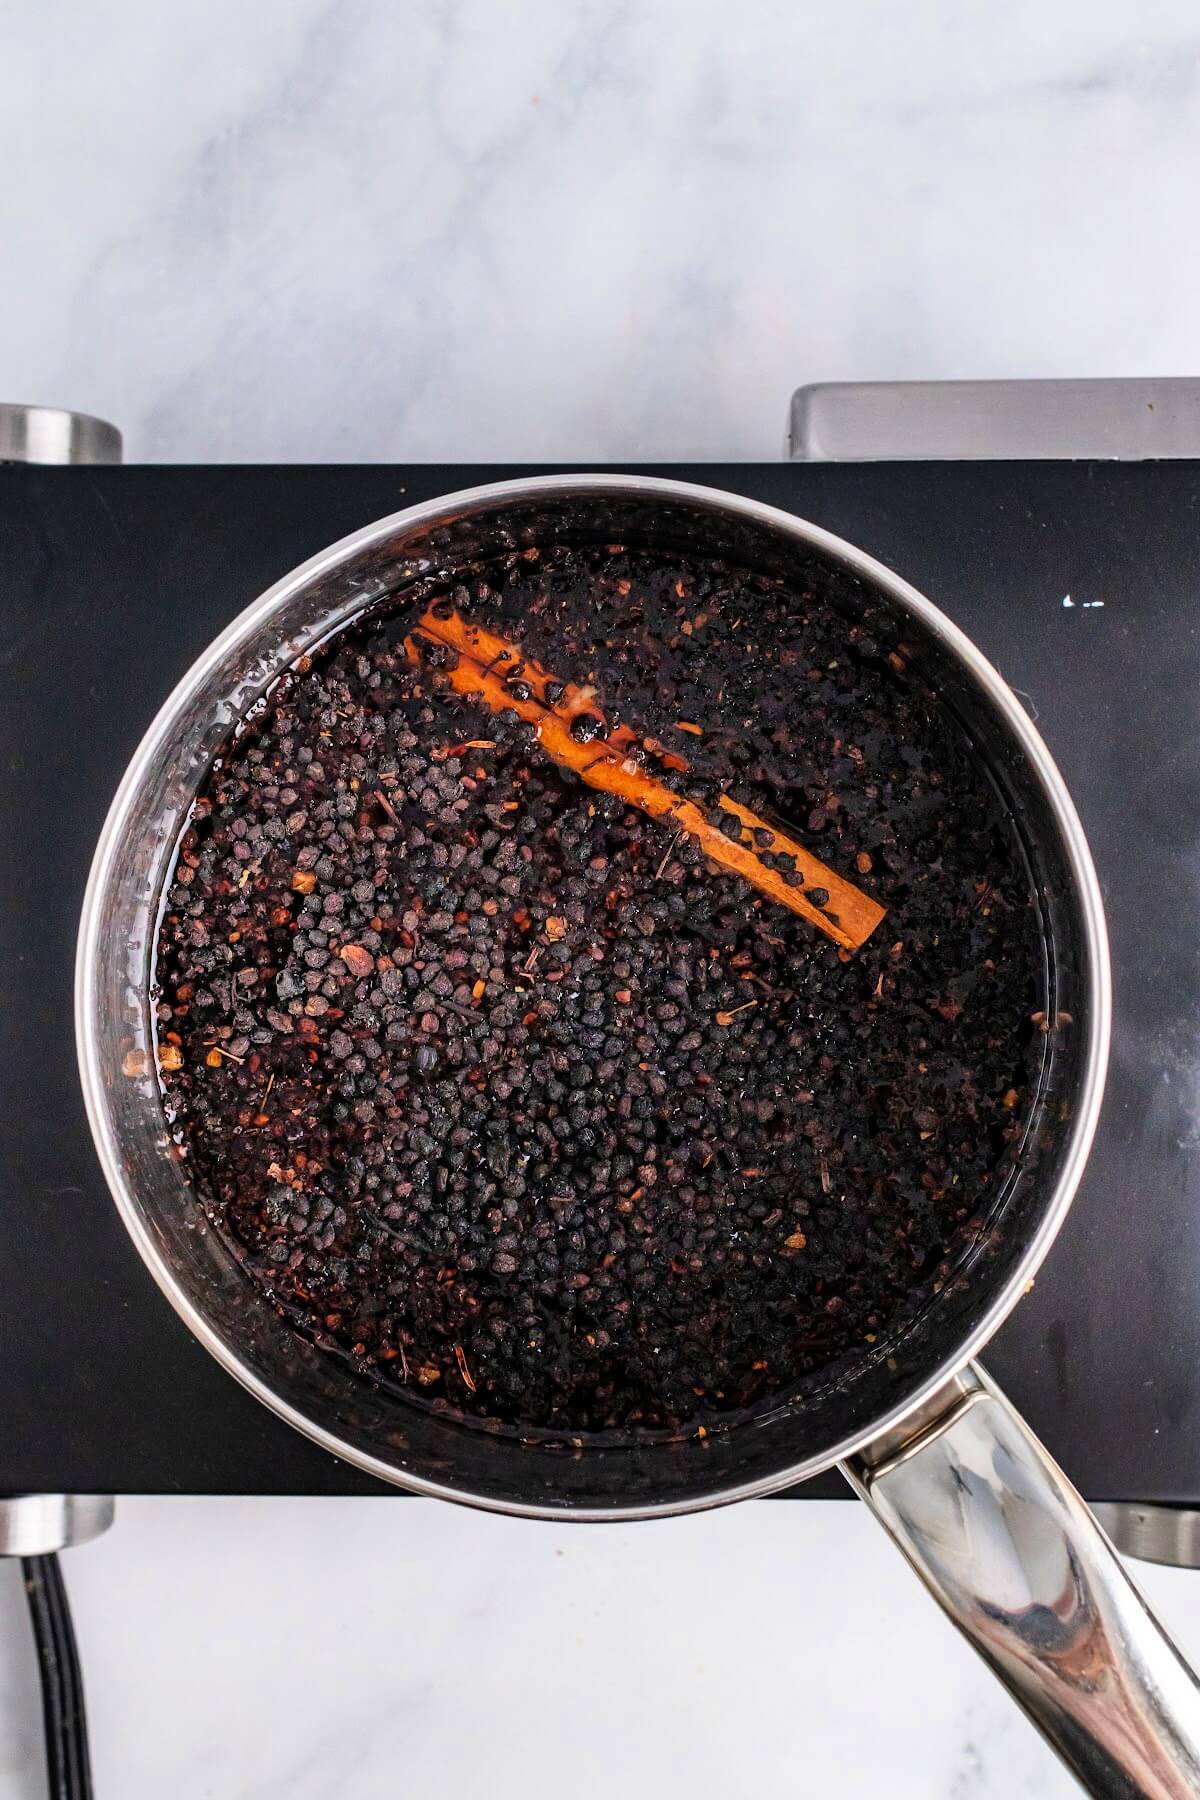 Overhead view of a saucepan filled with dried elderberries, liquid and a cinnamon stick, sitting on top of a stovetop.